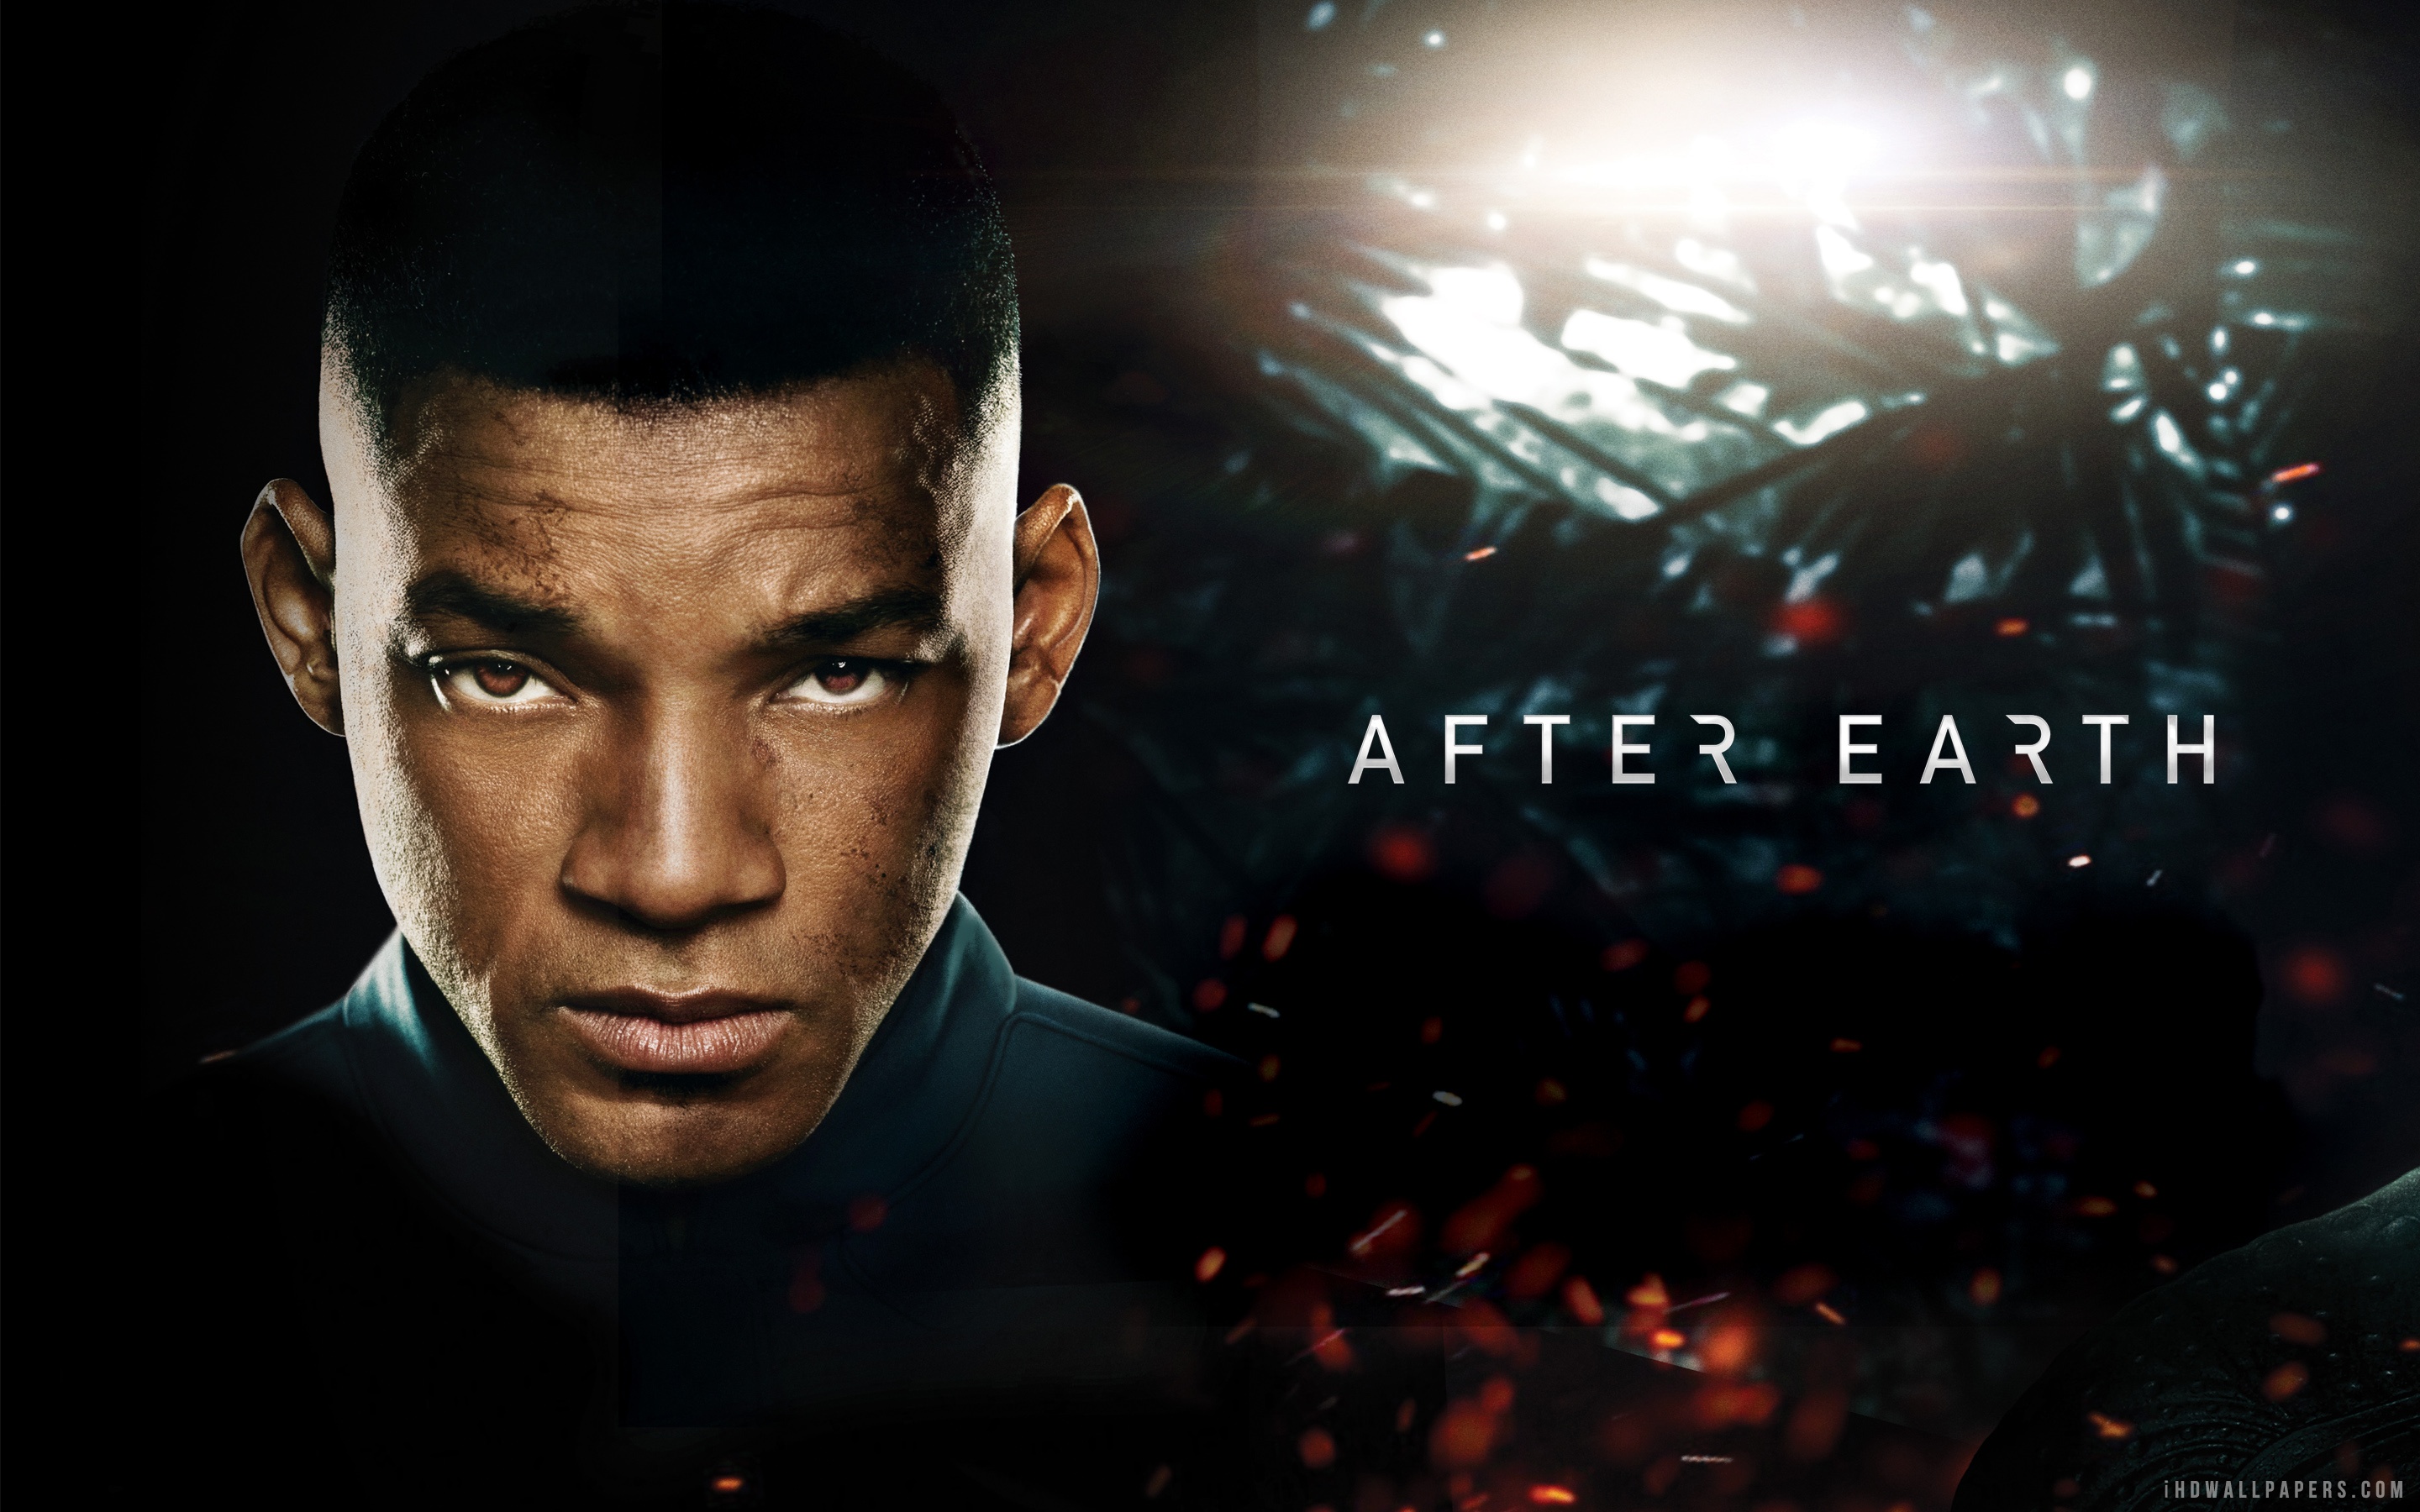 download-wallpaper-for-240x400-resolution-will-smith-in-after-earth